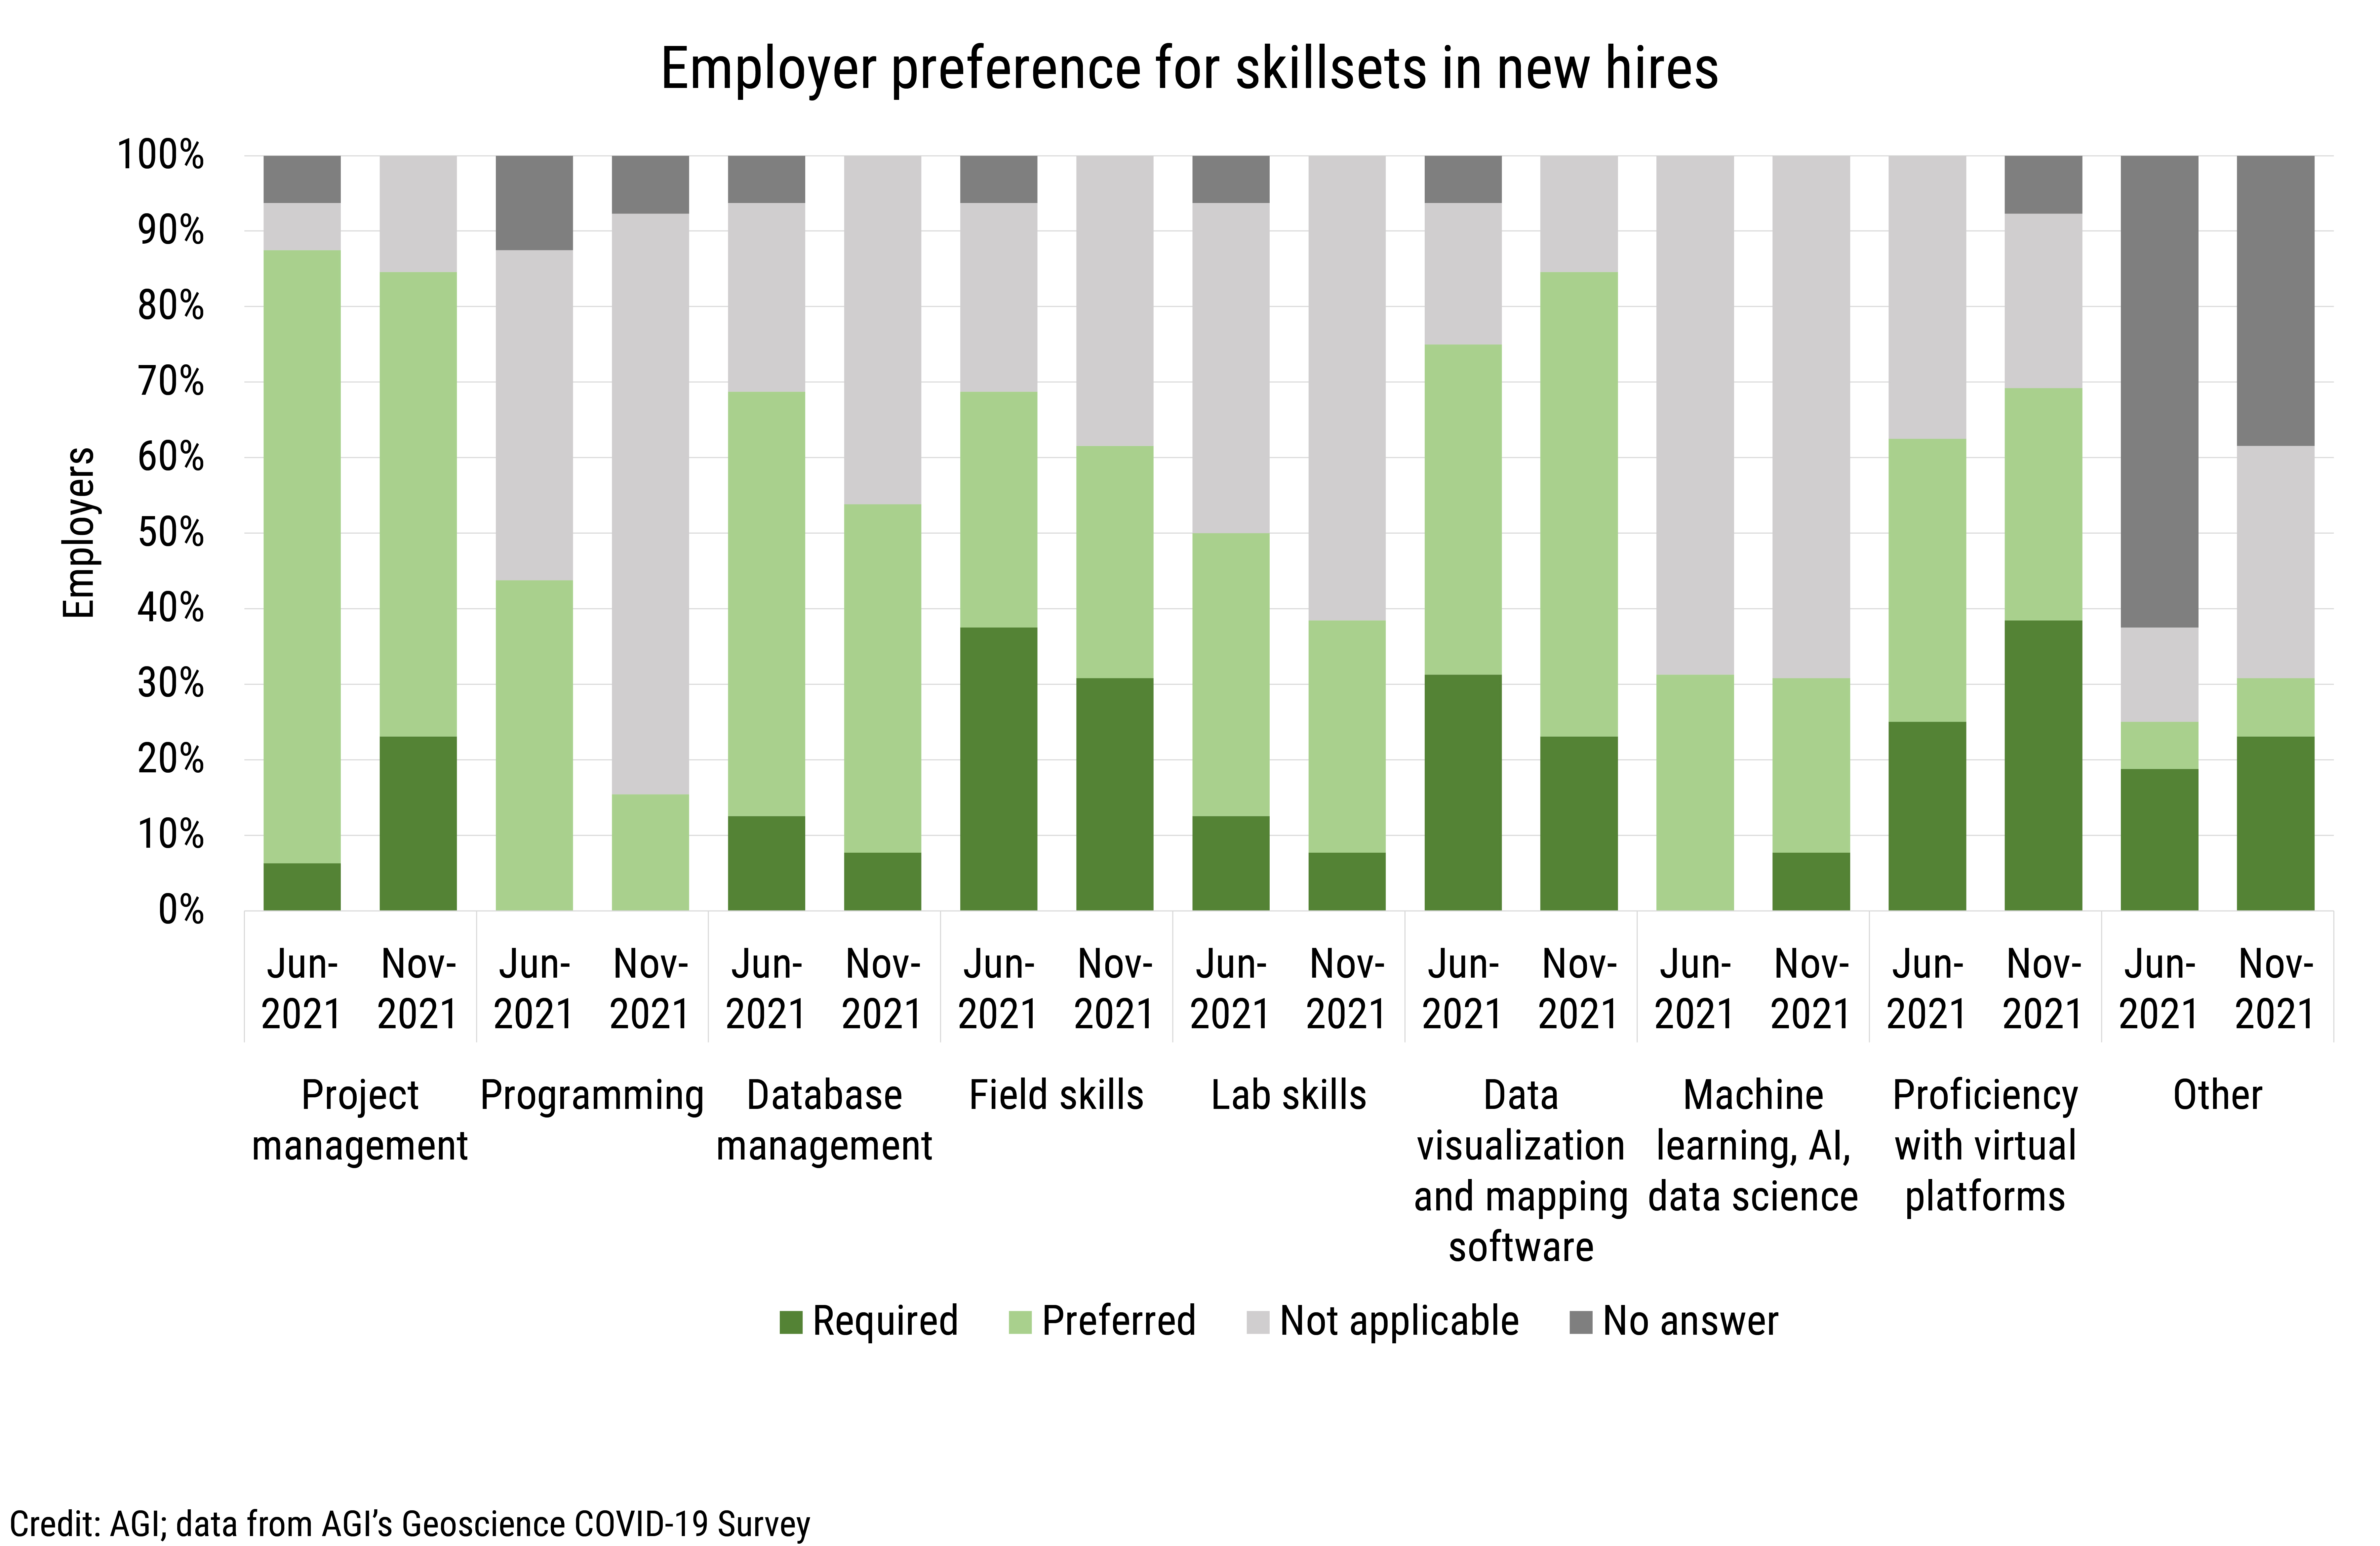 DB_2022-003 chart 13: Employer preference for skillsets in new hires (Credit: AGI; data from AGI's Geoscience COVID-19 Survey)